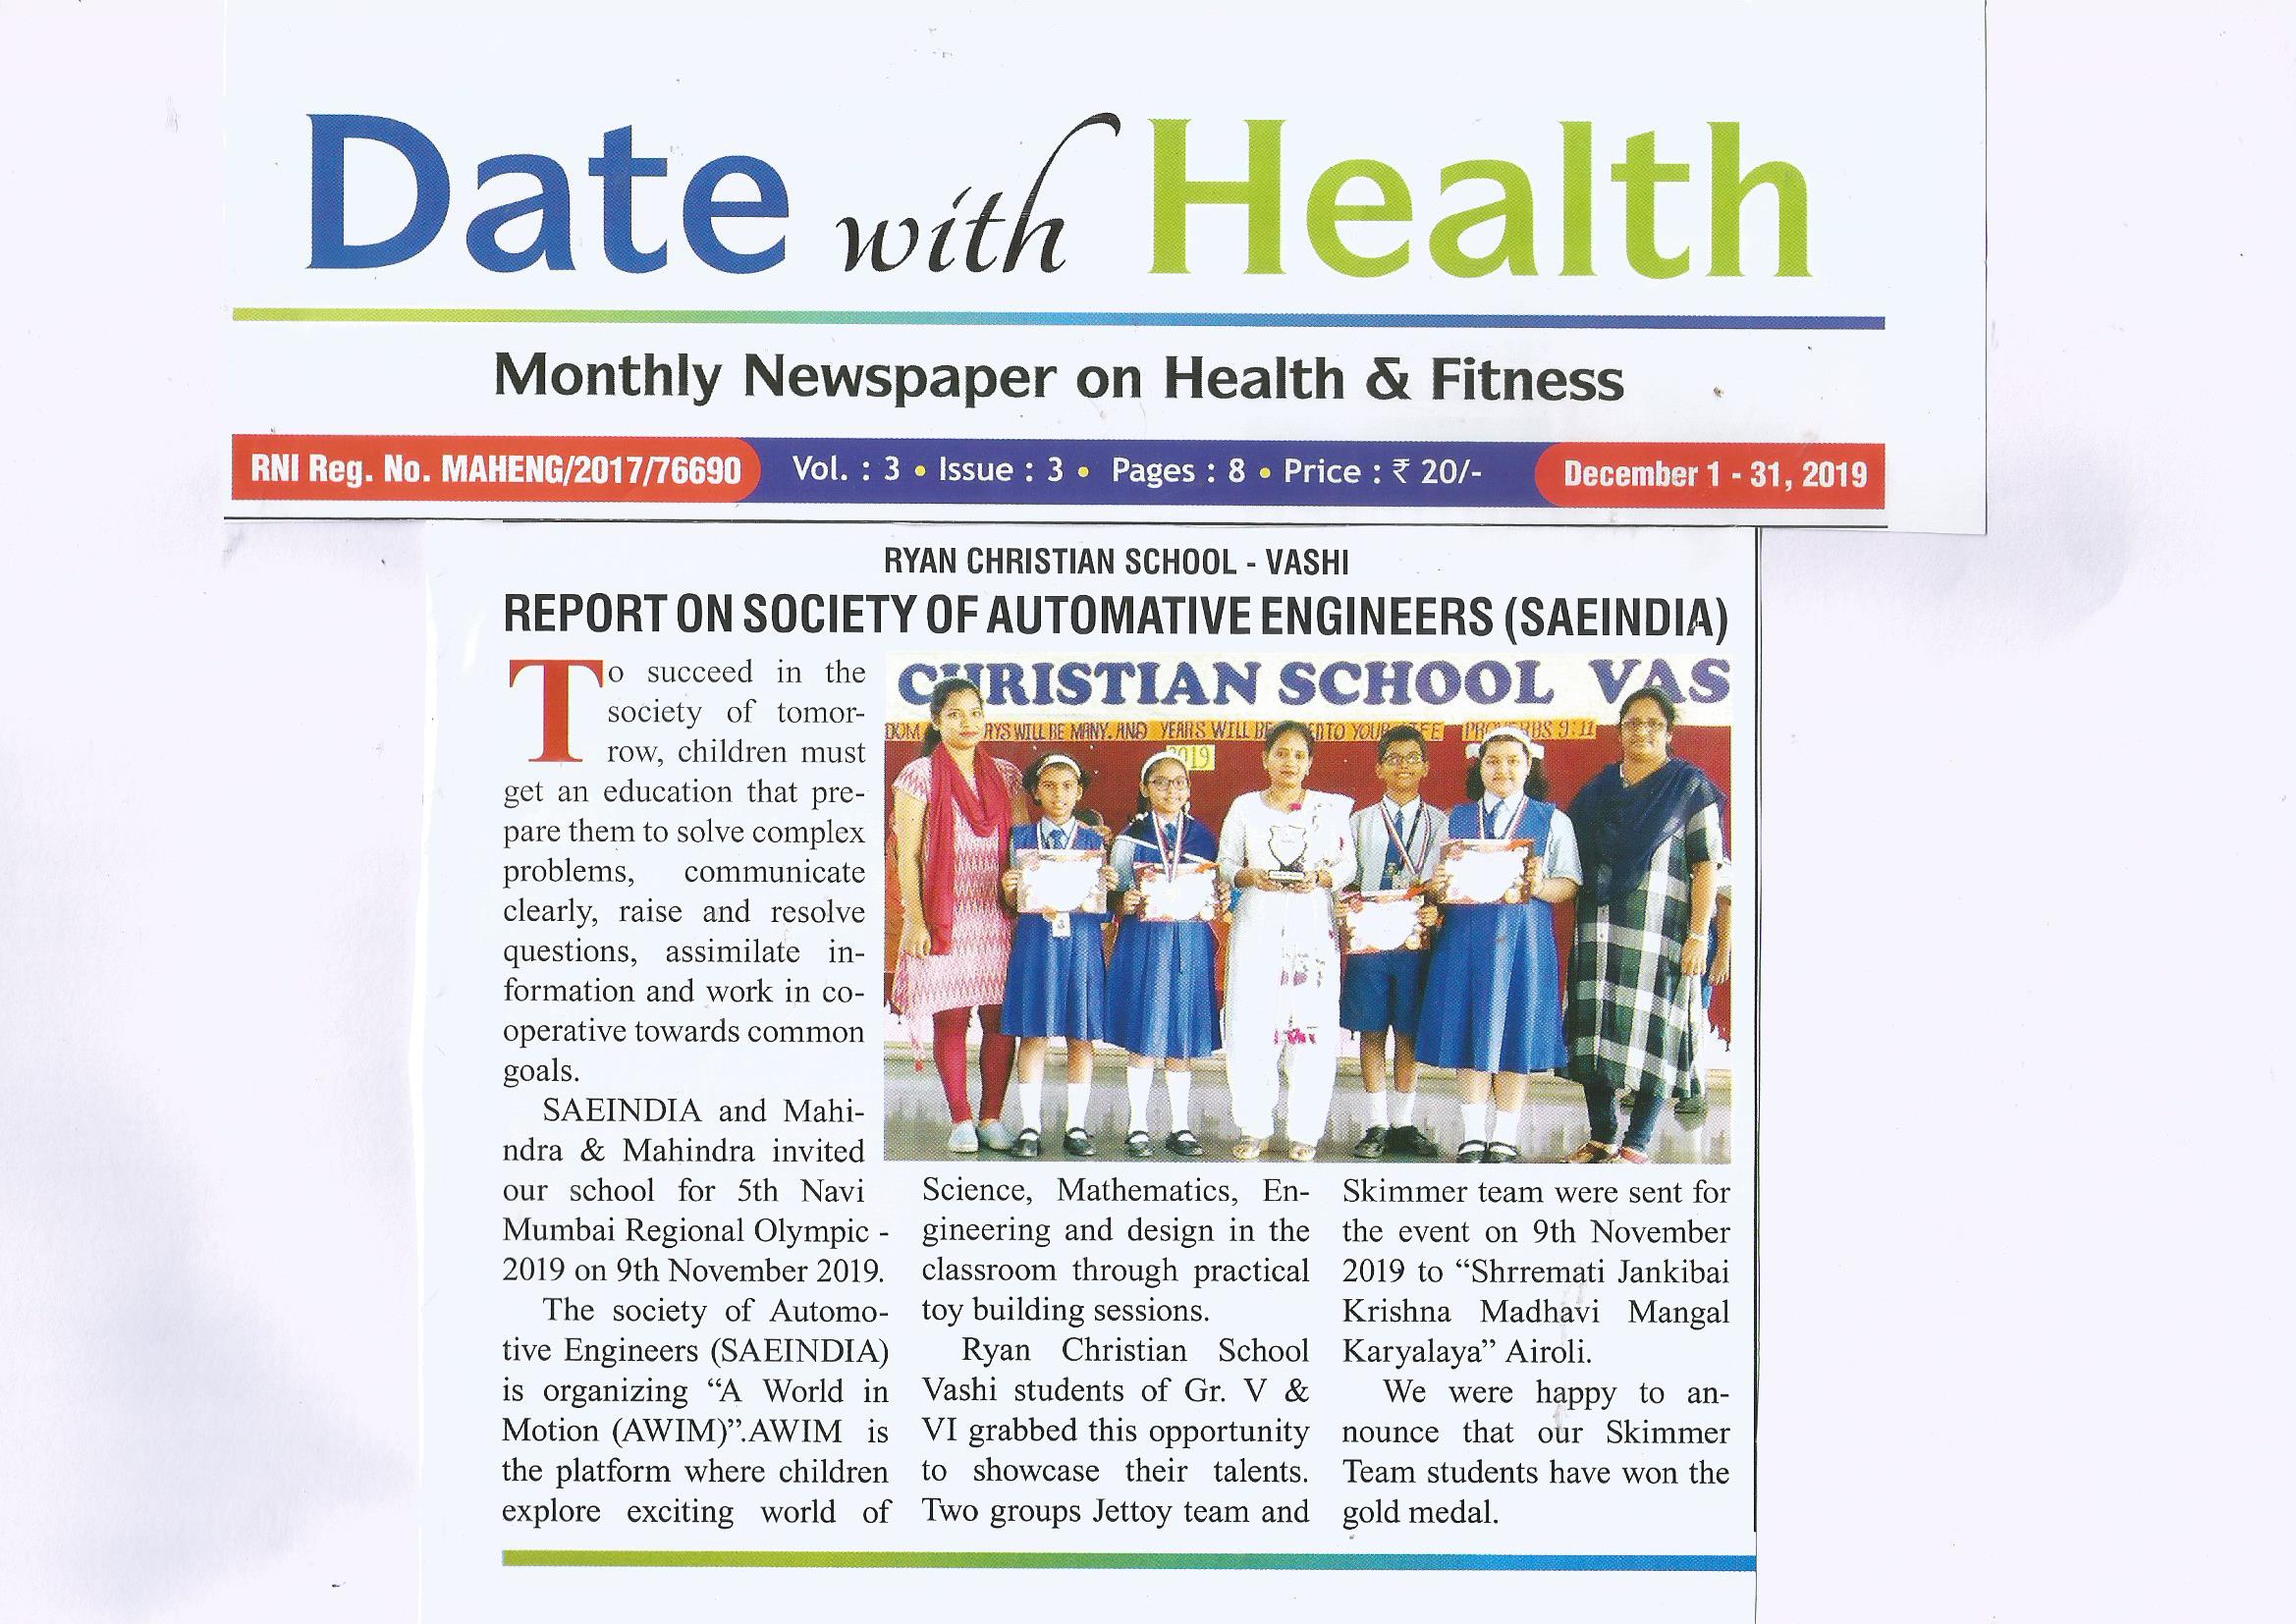 Automotive Engineers (SAEIndia) was featured in Date with Health